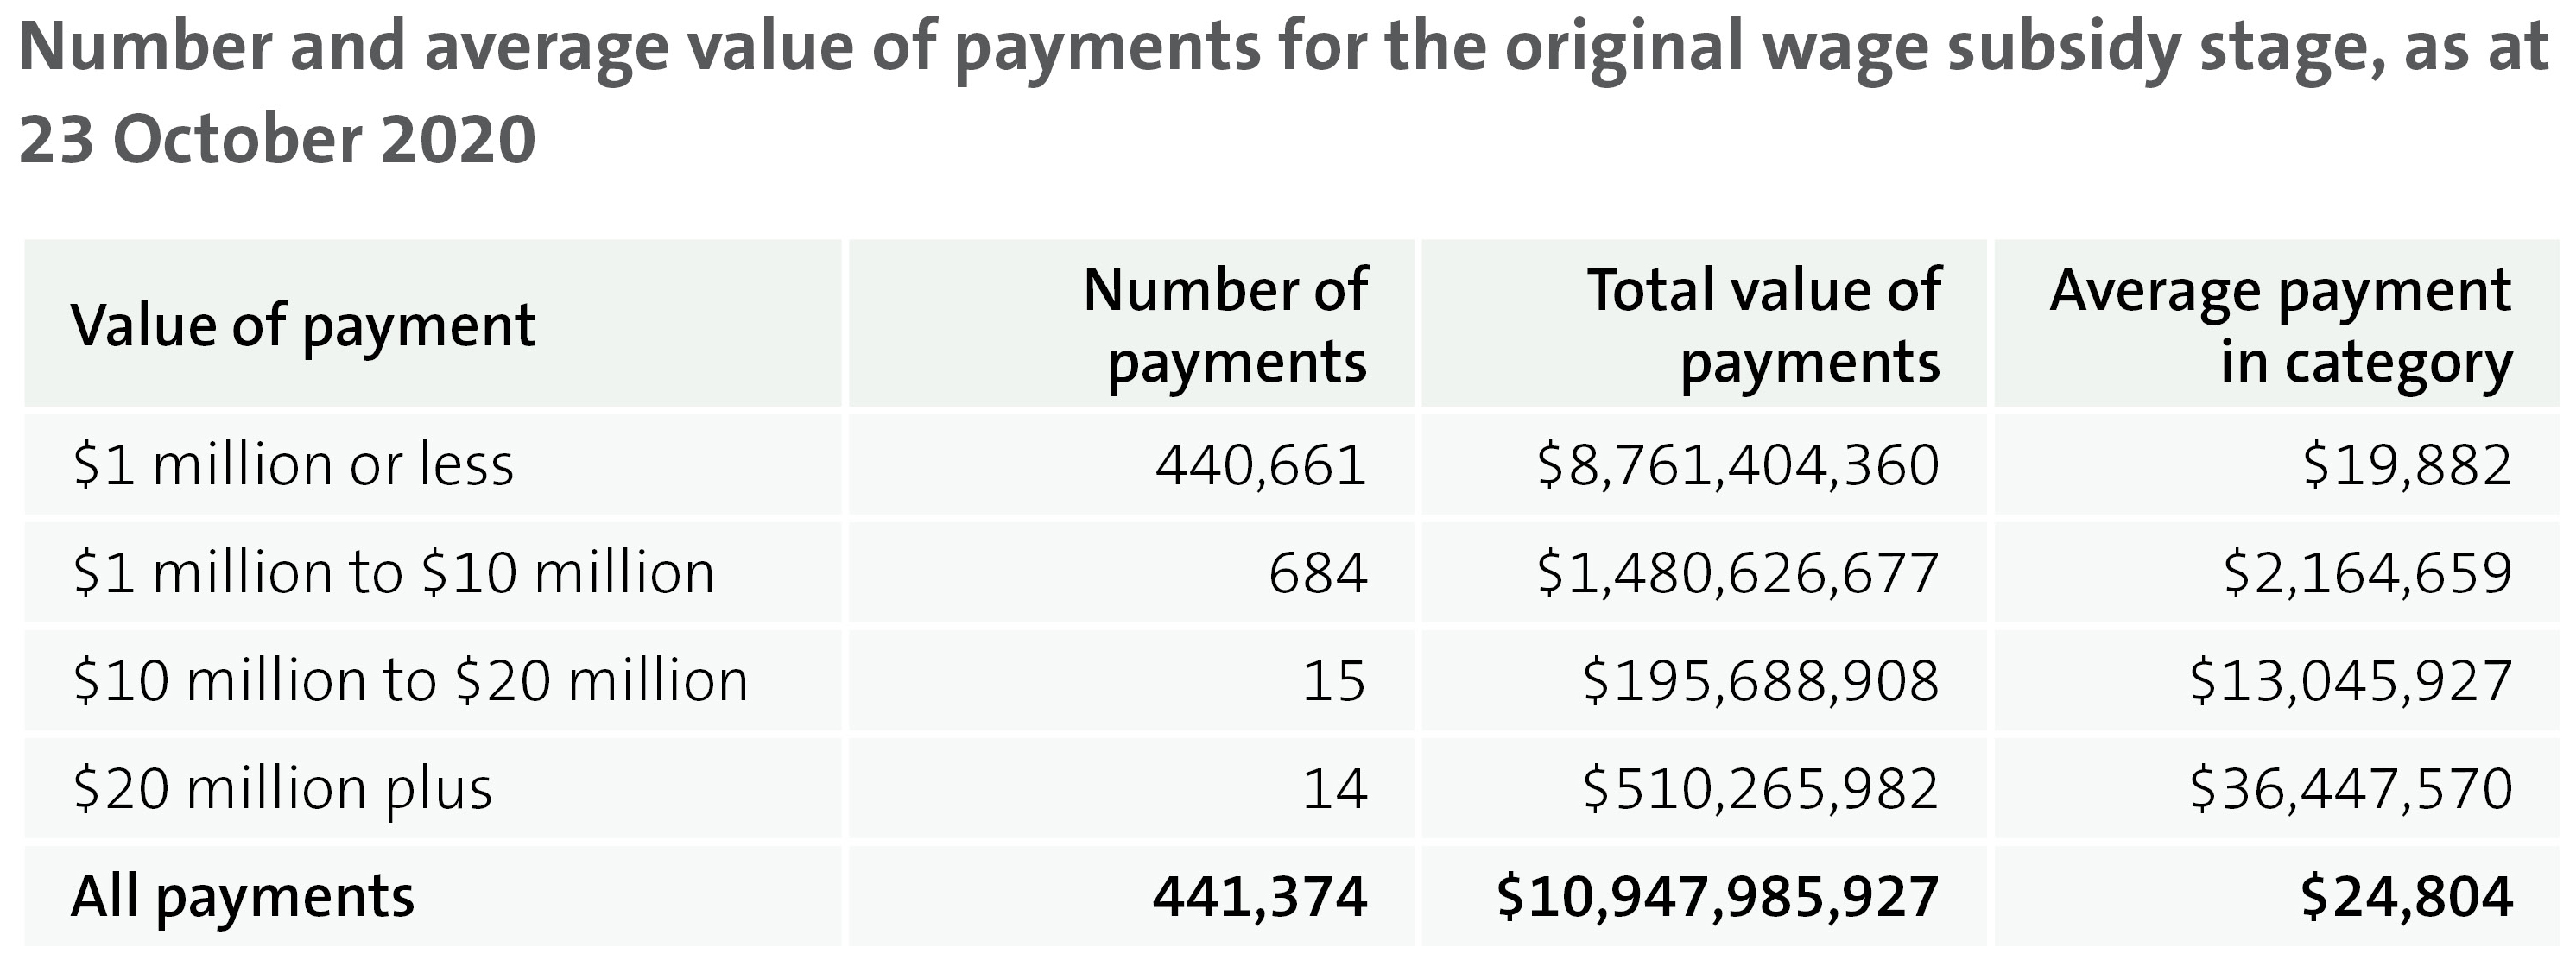 Figure 6 - Number and average value of payments for the original wage subsidy stage, as at 23 October 2020